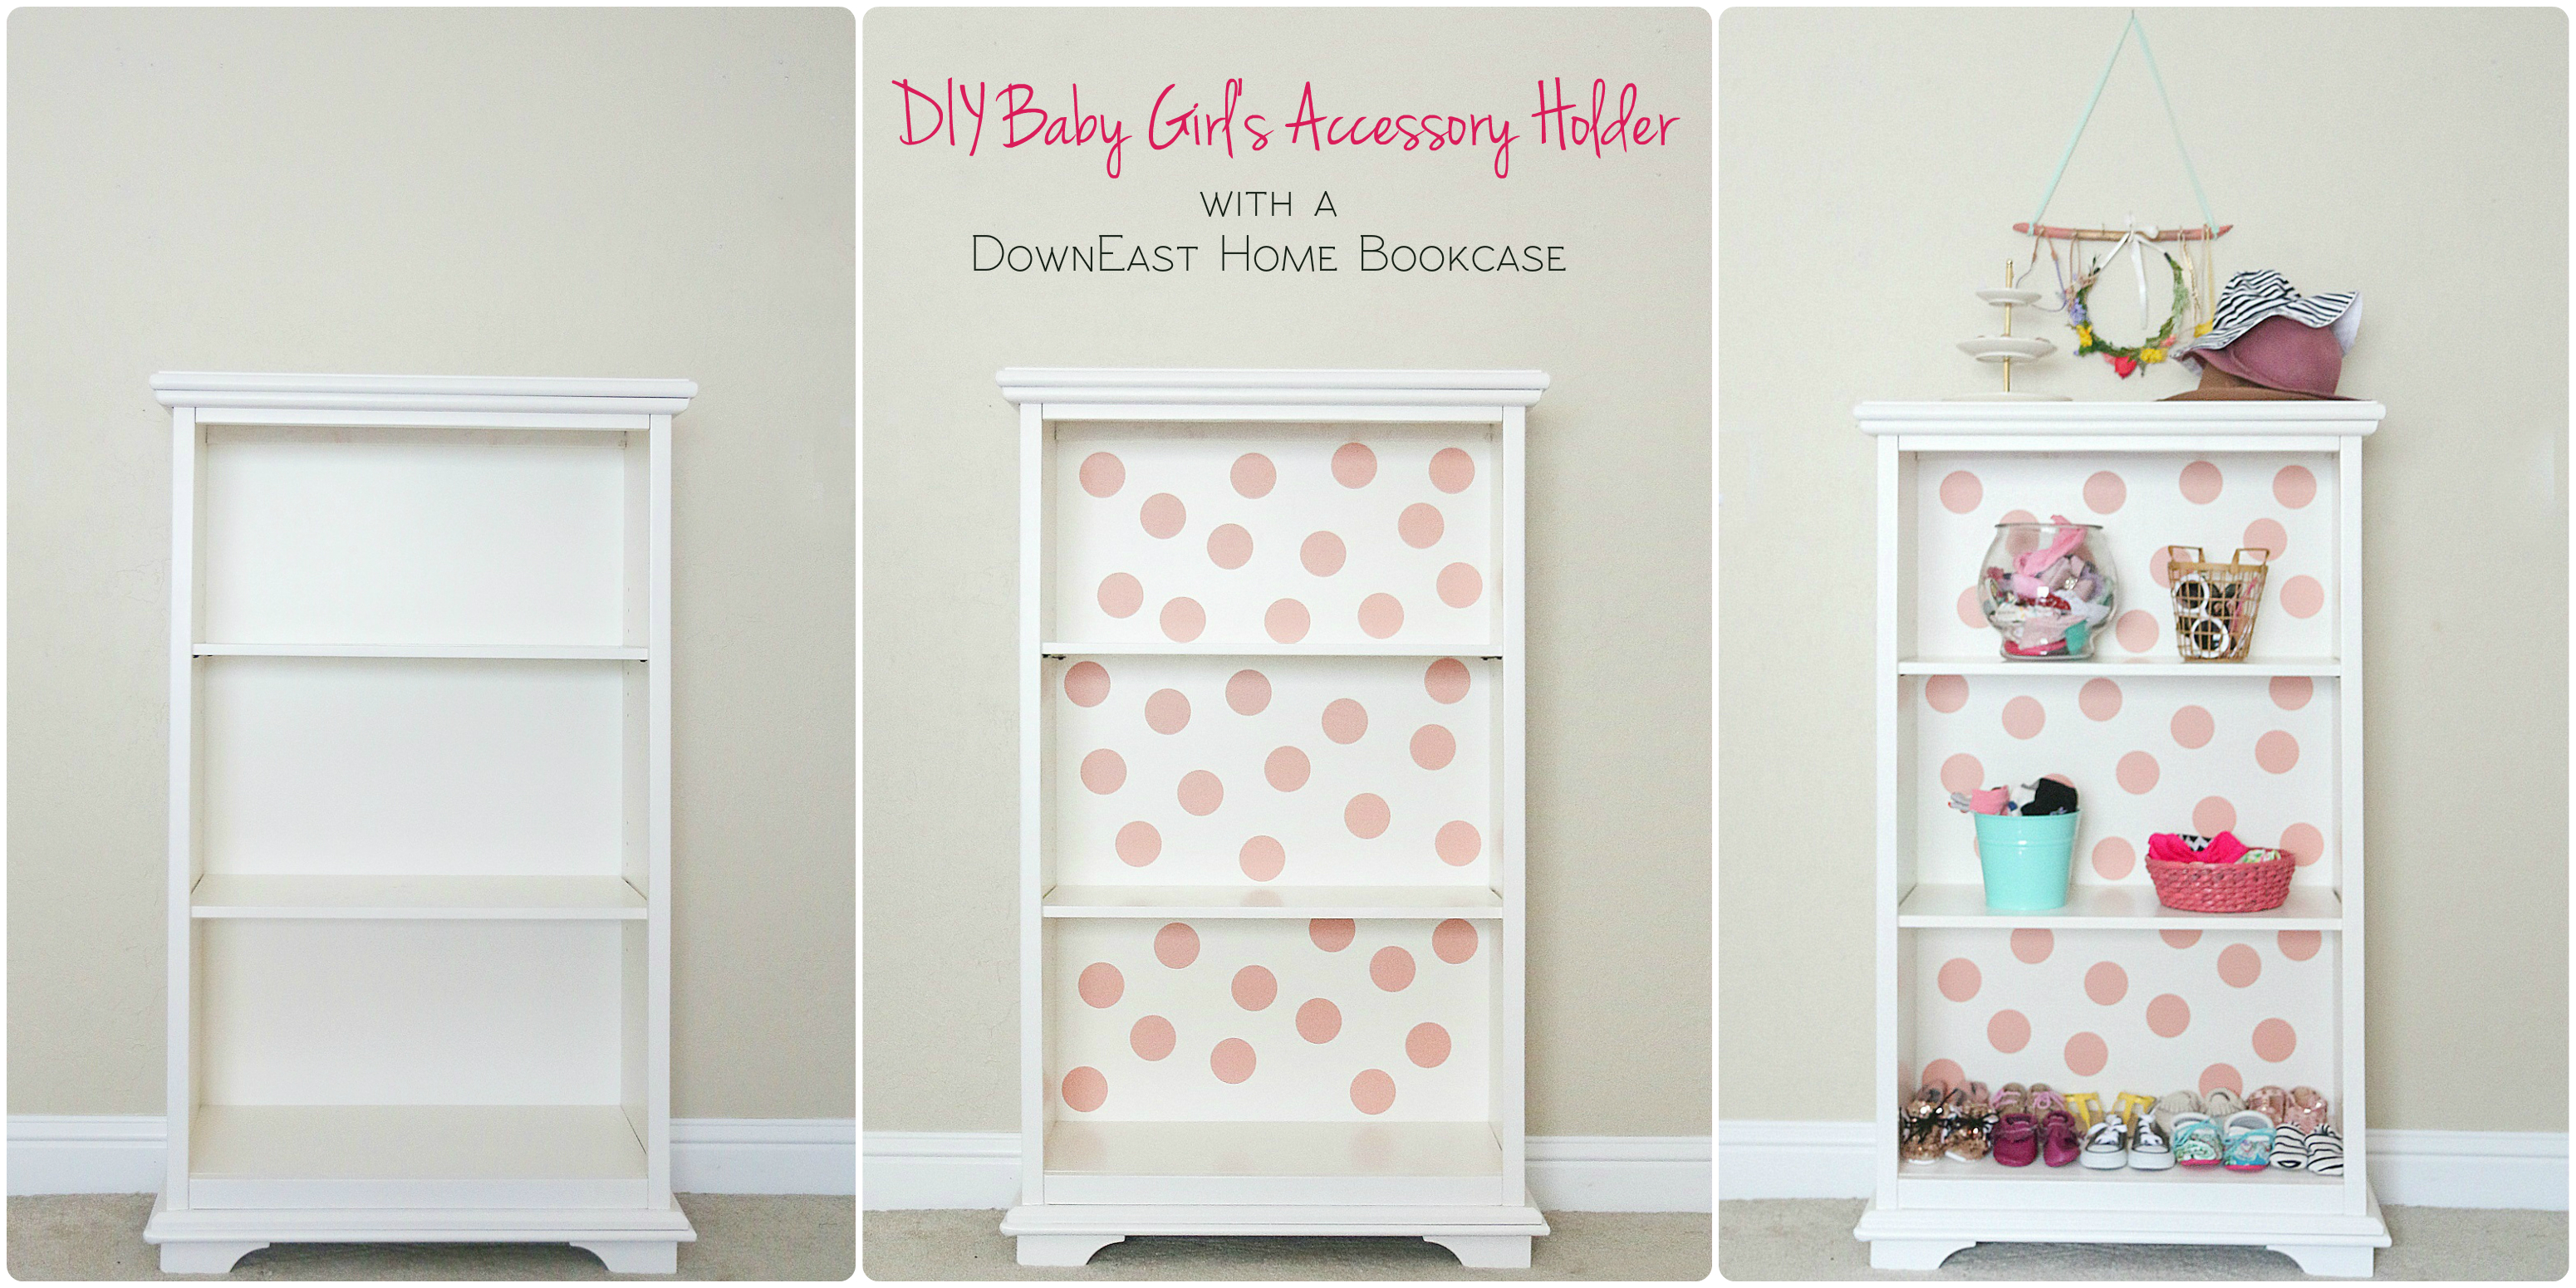 Downeast Home Bookcase Turned Into Diy Baby Girl S Accessory